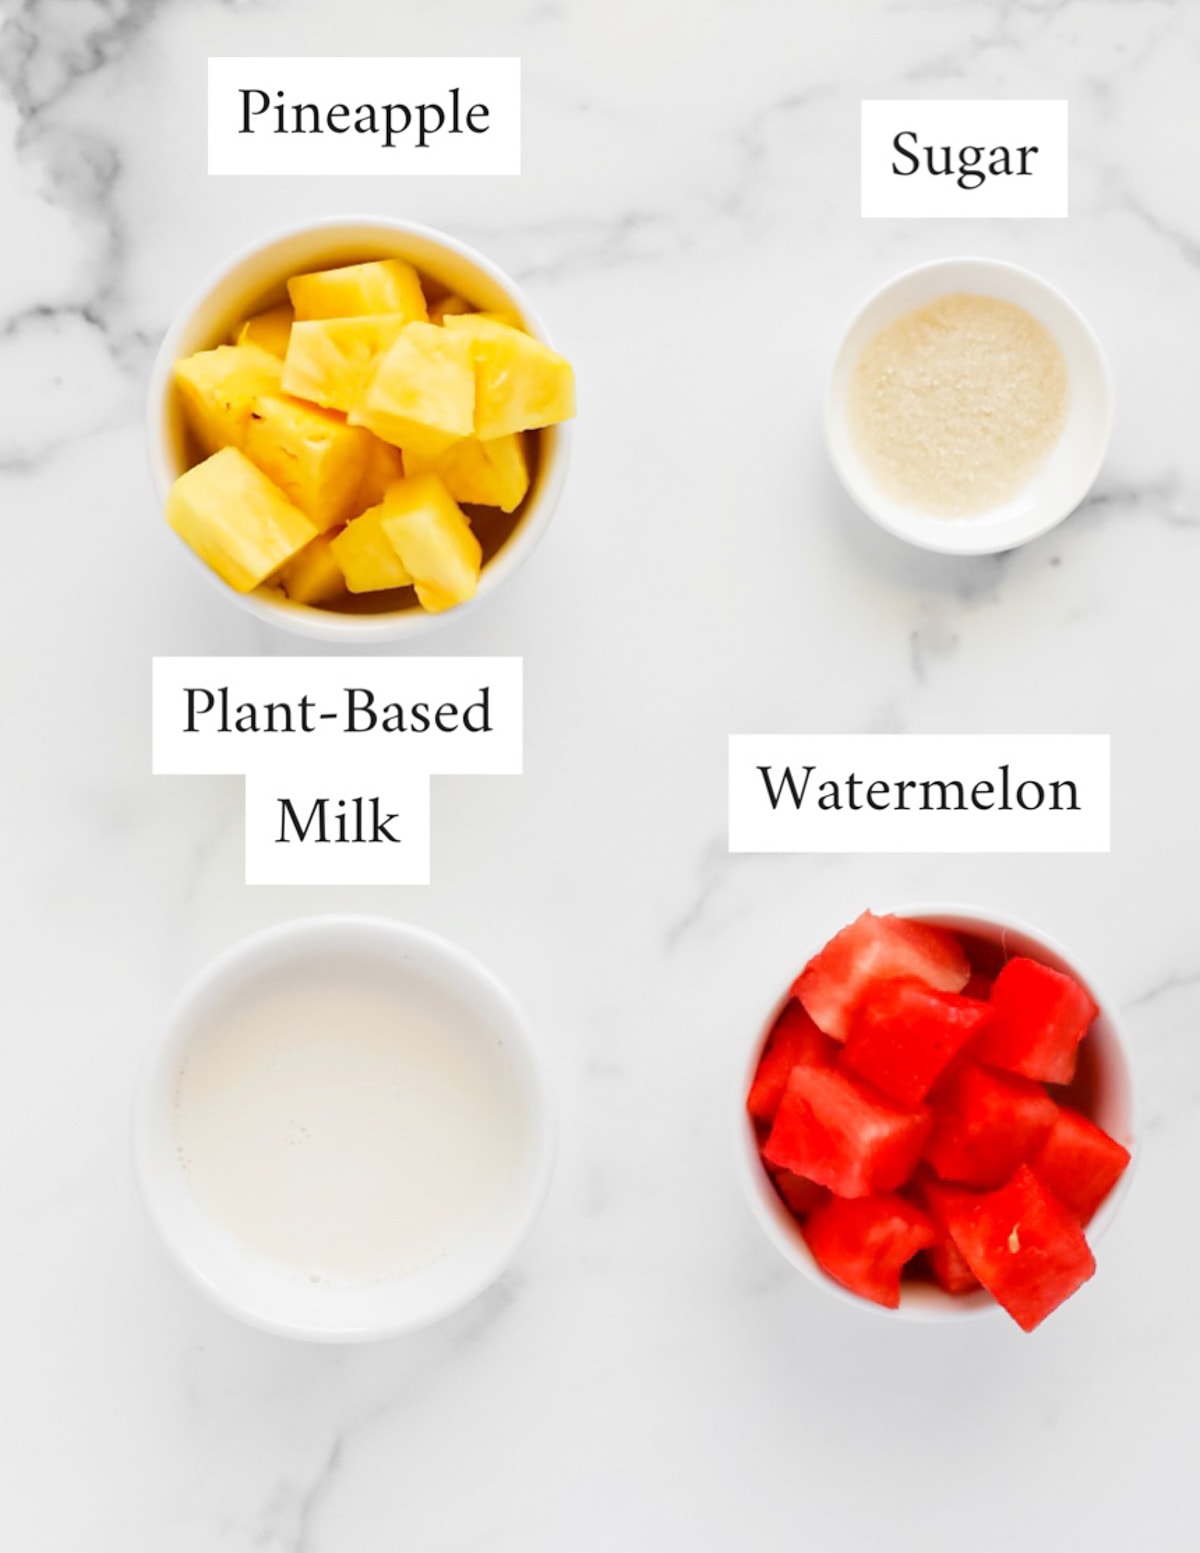 Labeled ingredients including: pineapple, sugar, plant-based milk, watermelon